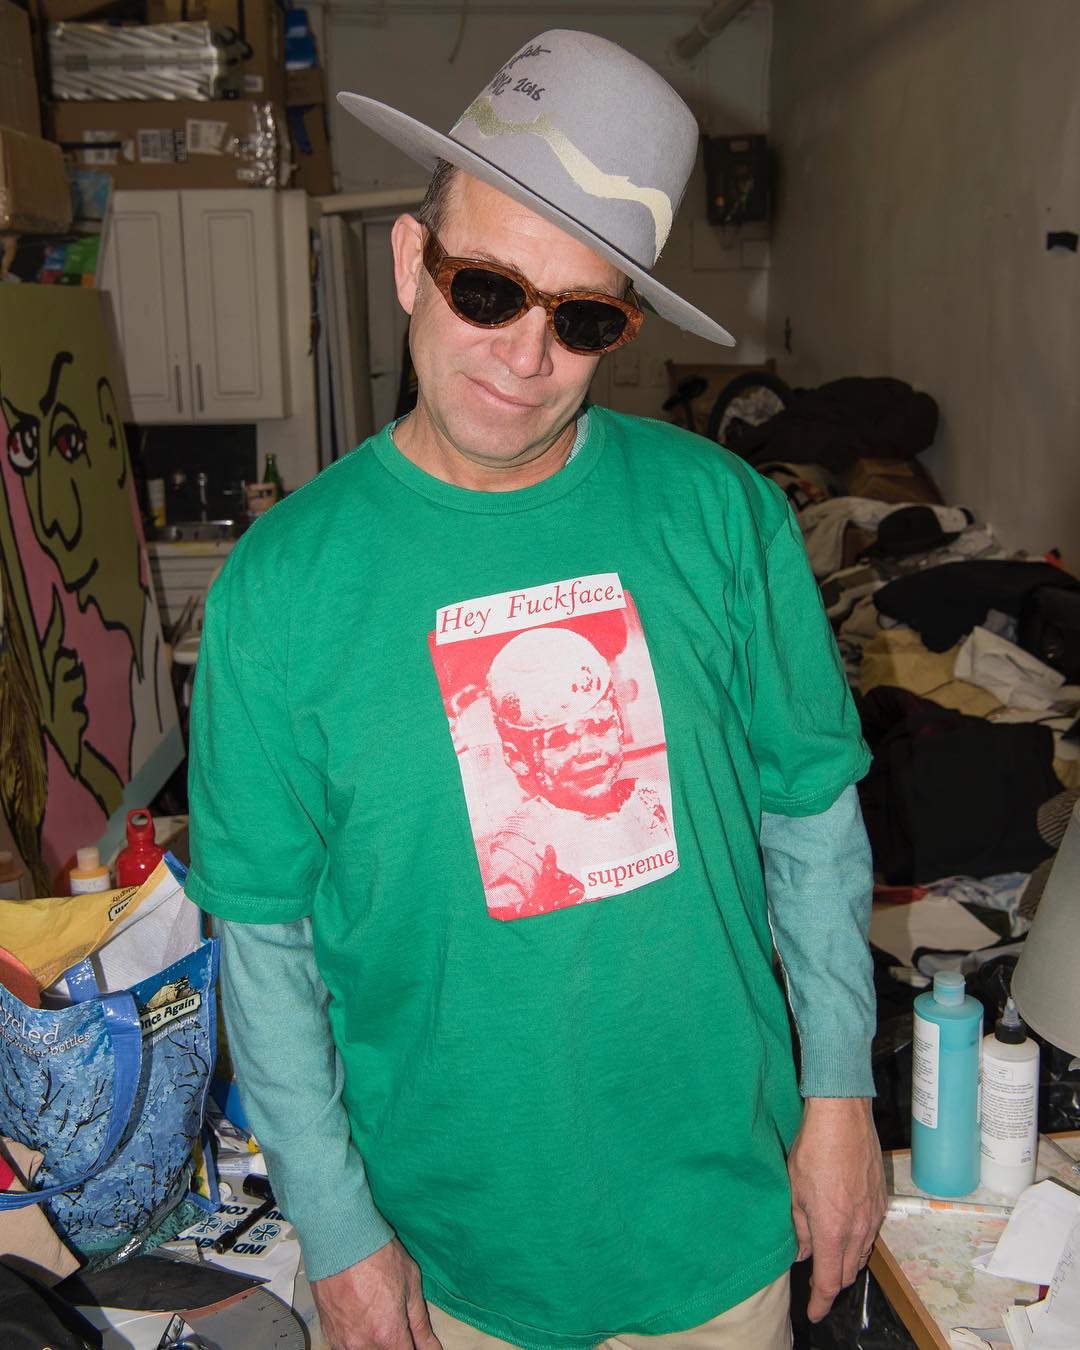 Supreme Revealed New Tees Ahead of Their Drop Alongside the Nan Goldin Collab